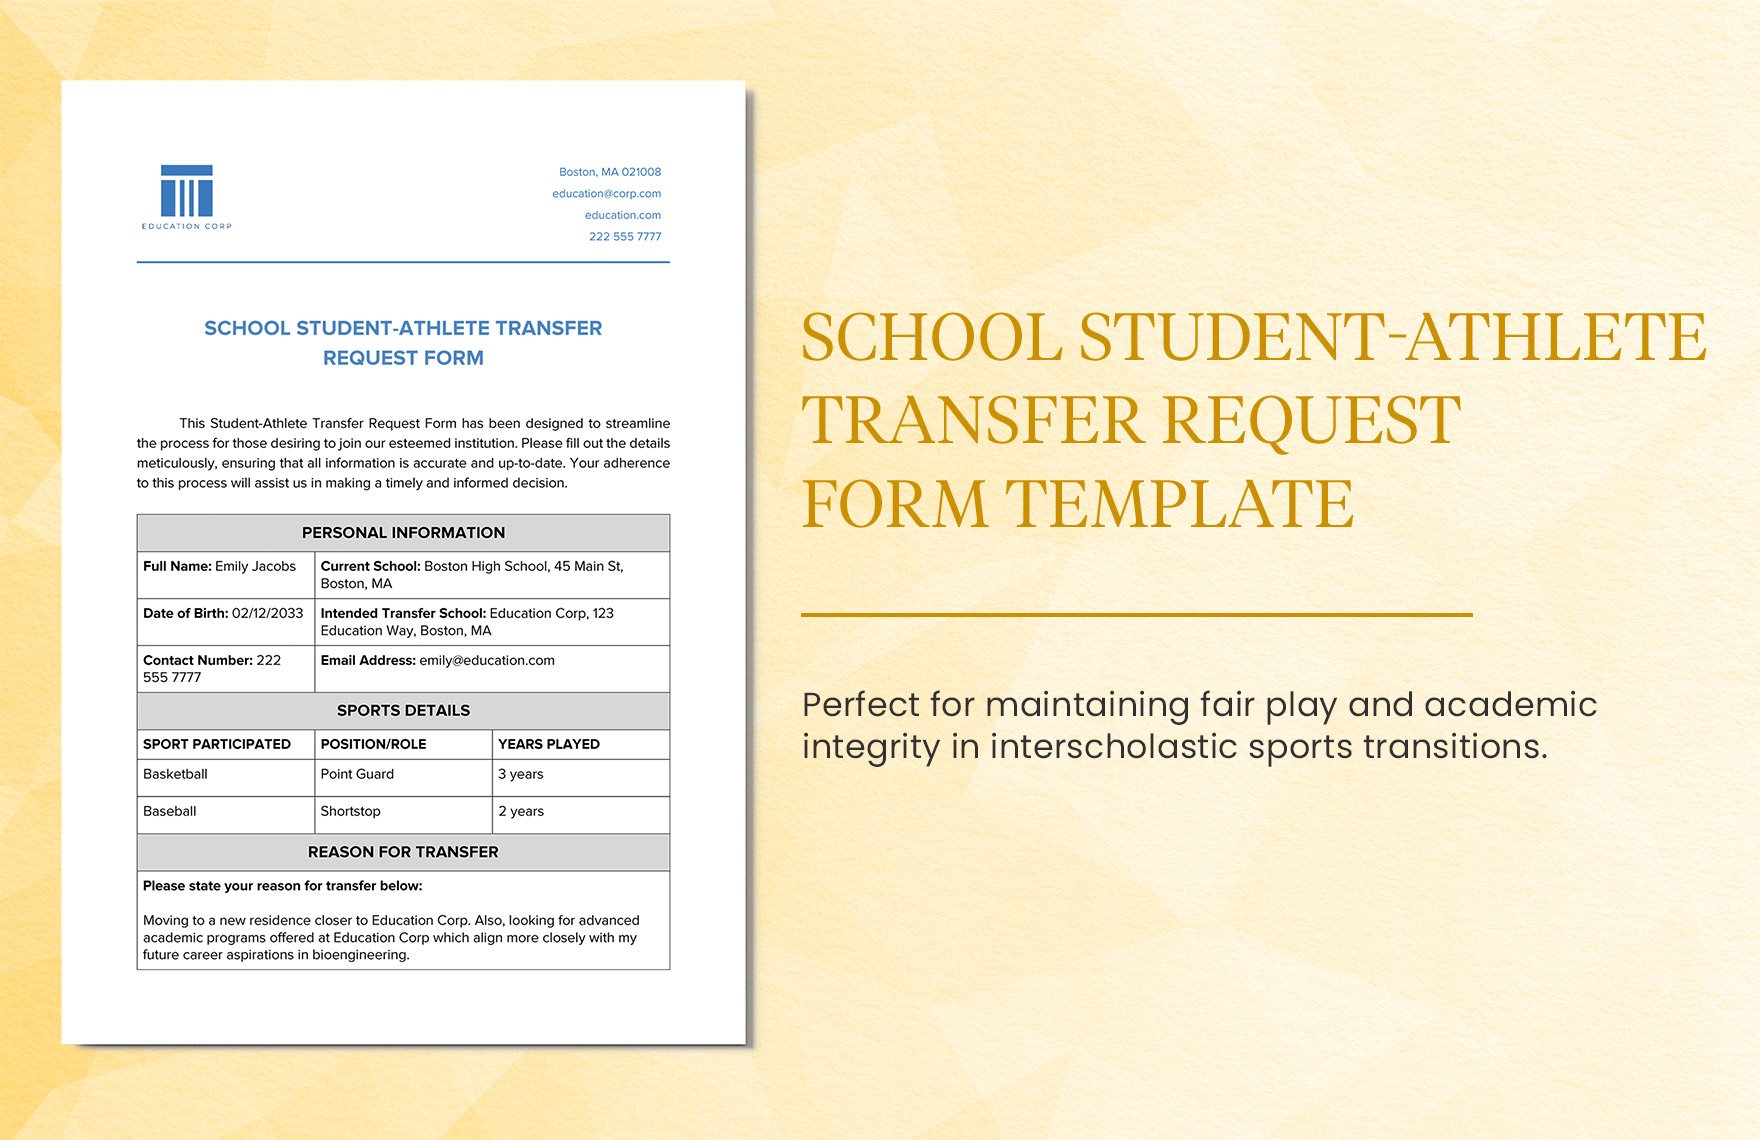 School Student-Athlete Transfer Request Form Template